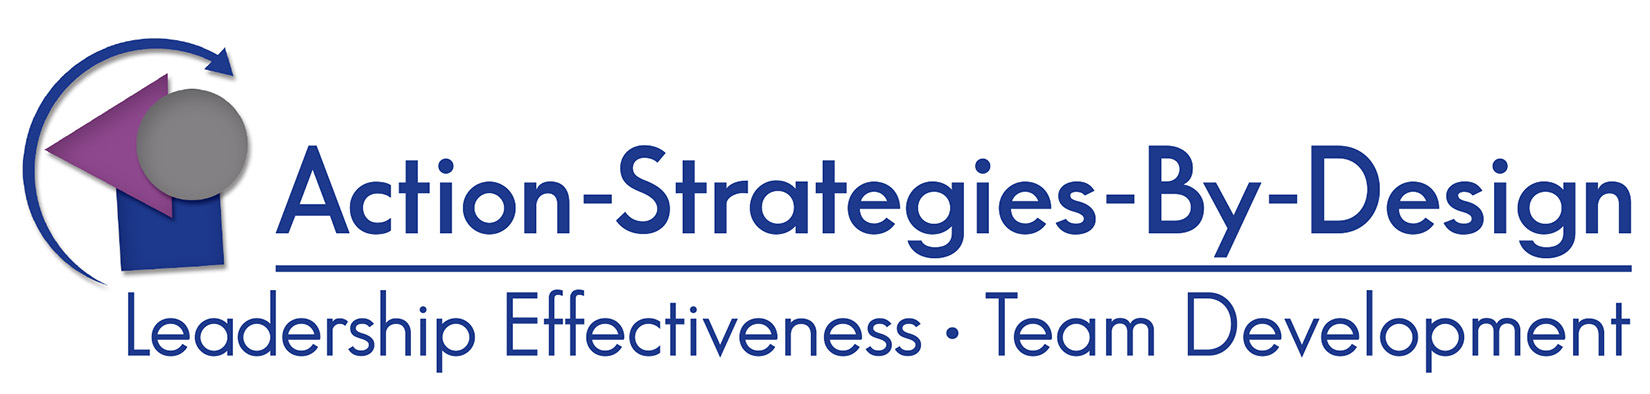 Action-Strategies-By-Design Logo